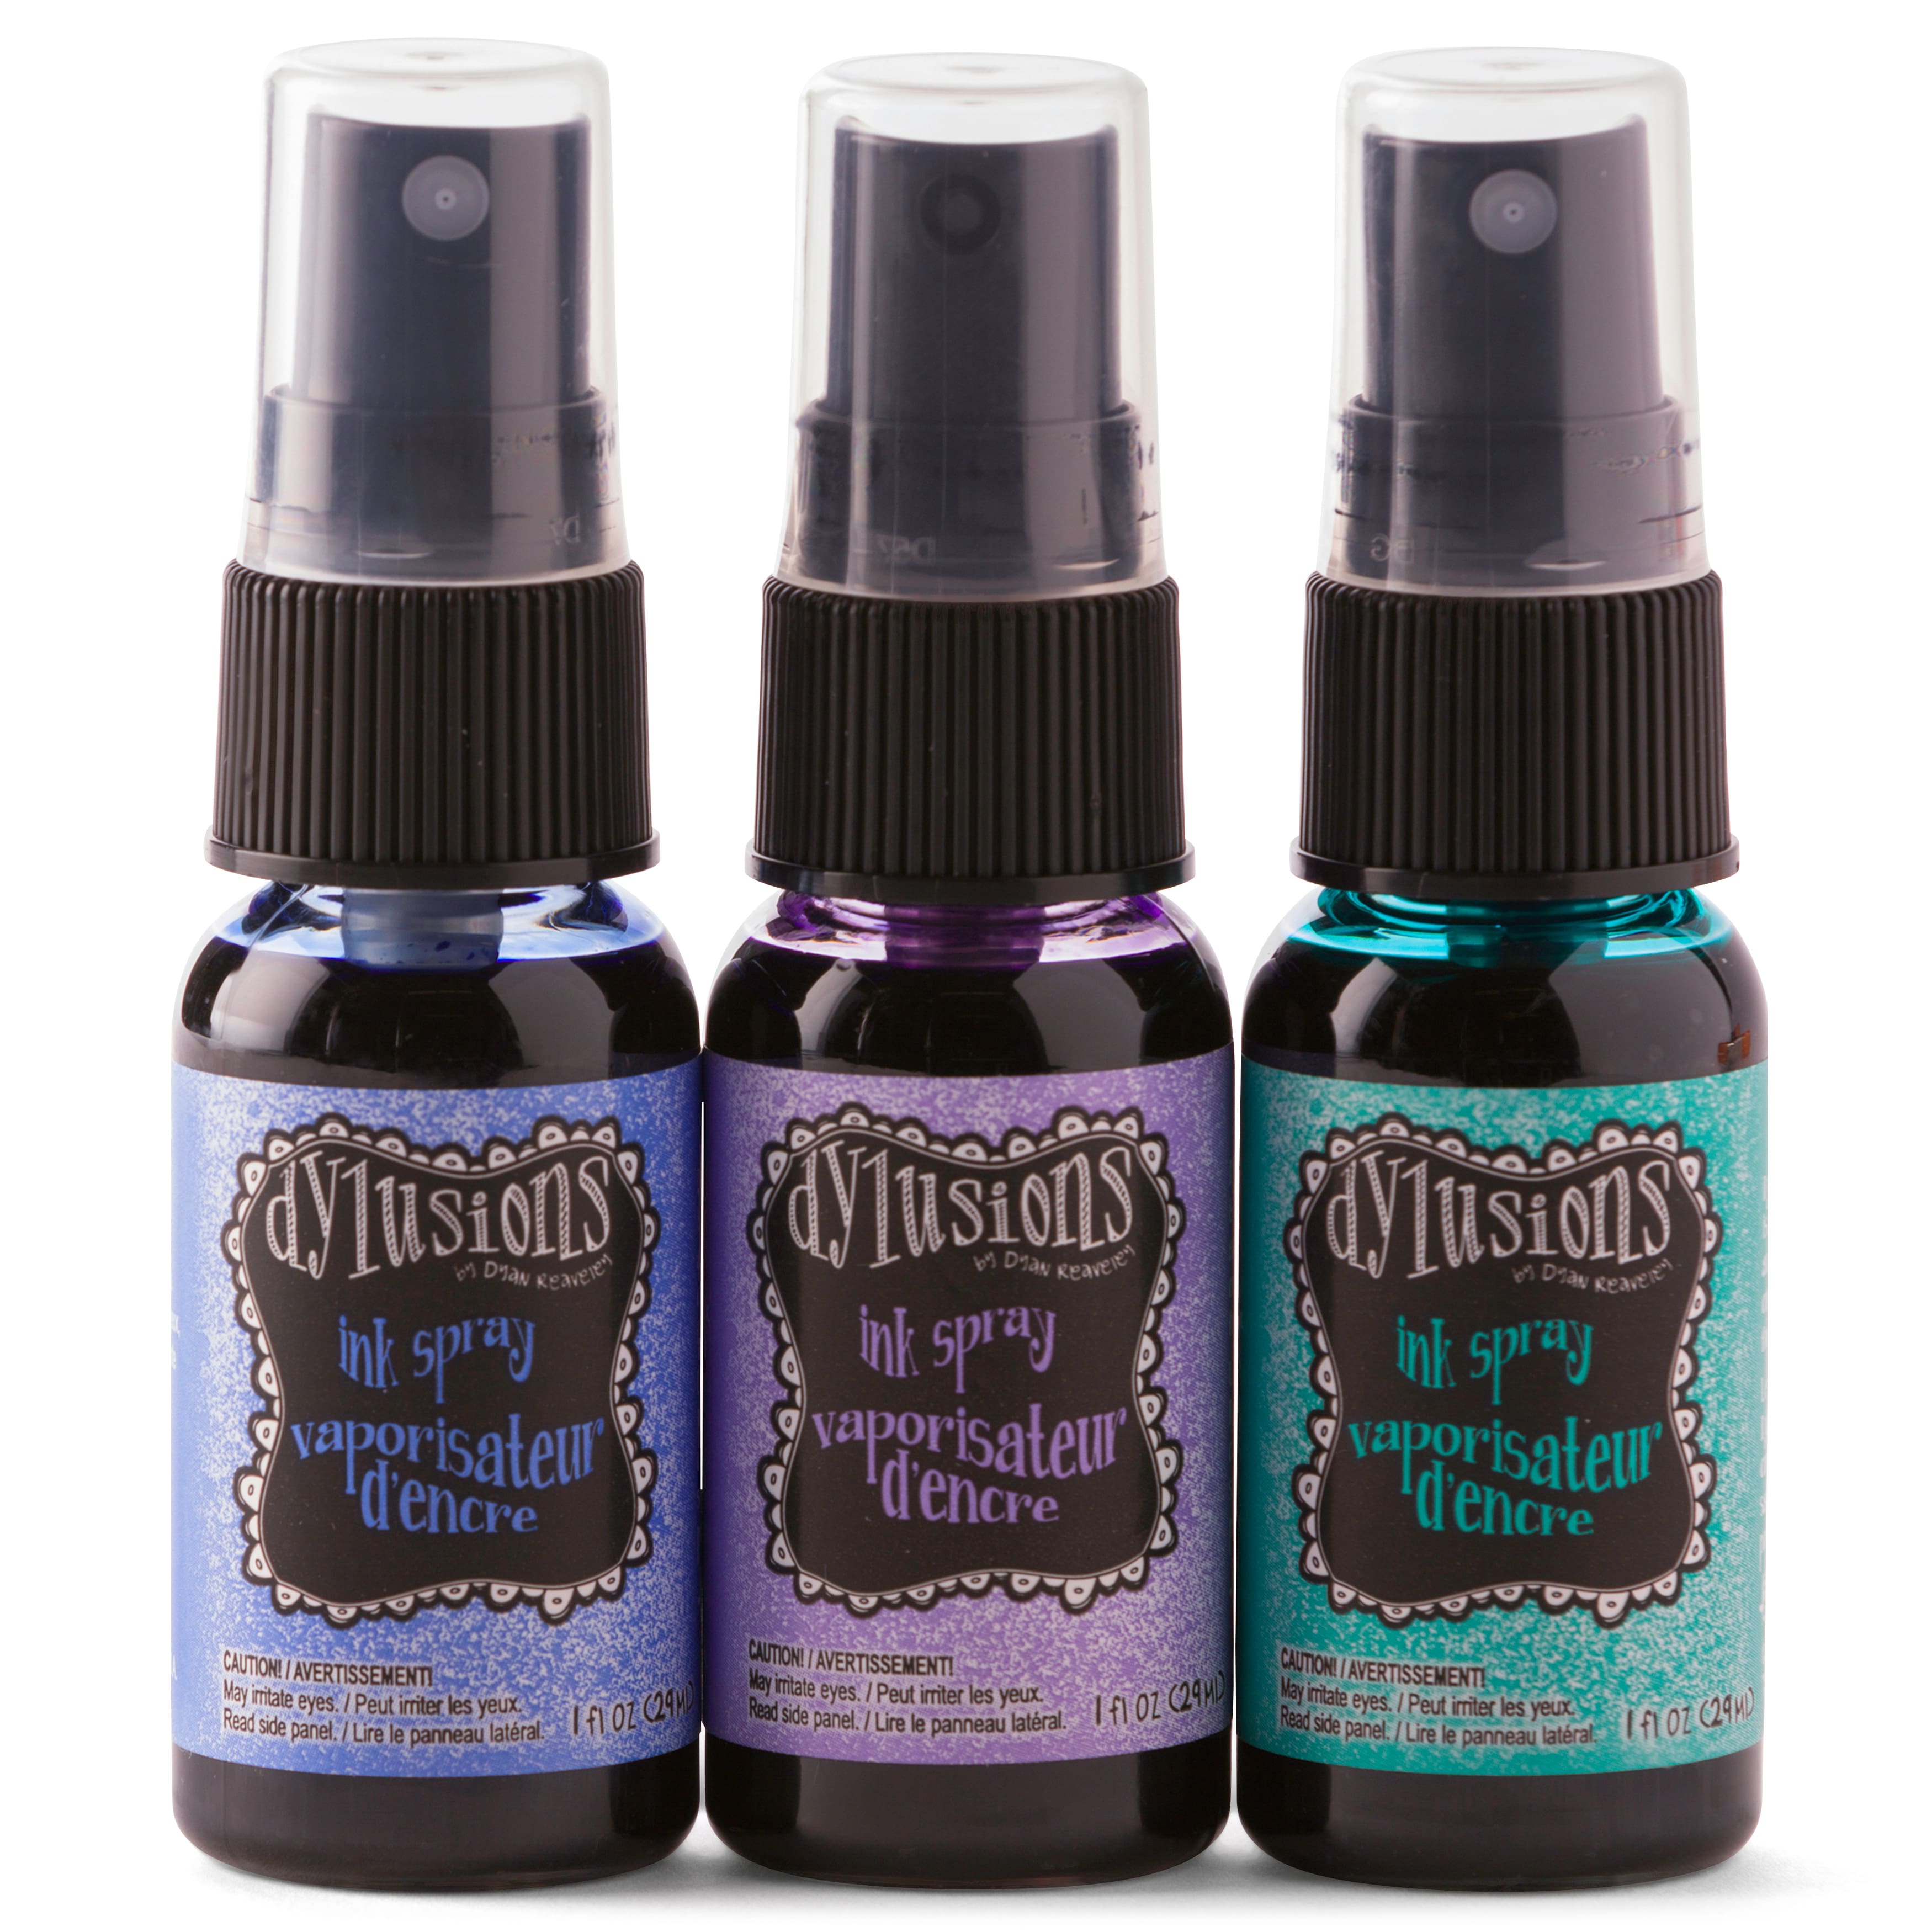 6 Packs: 3 ct. (18 total) Dylusions Ink Spray Set 1